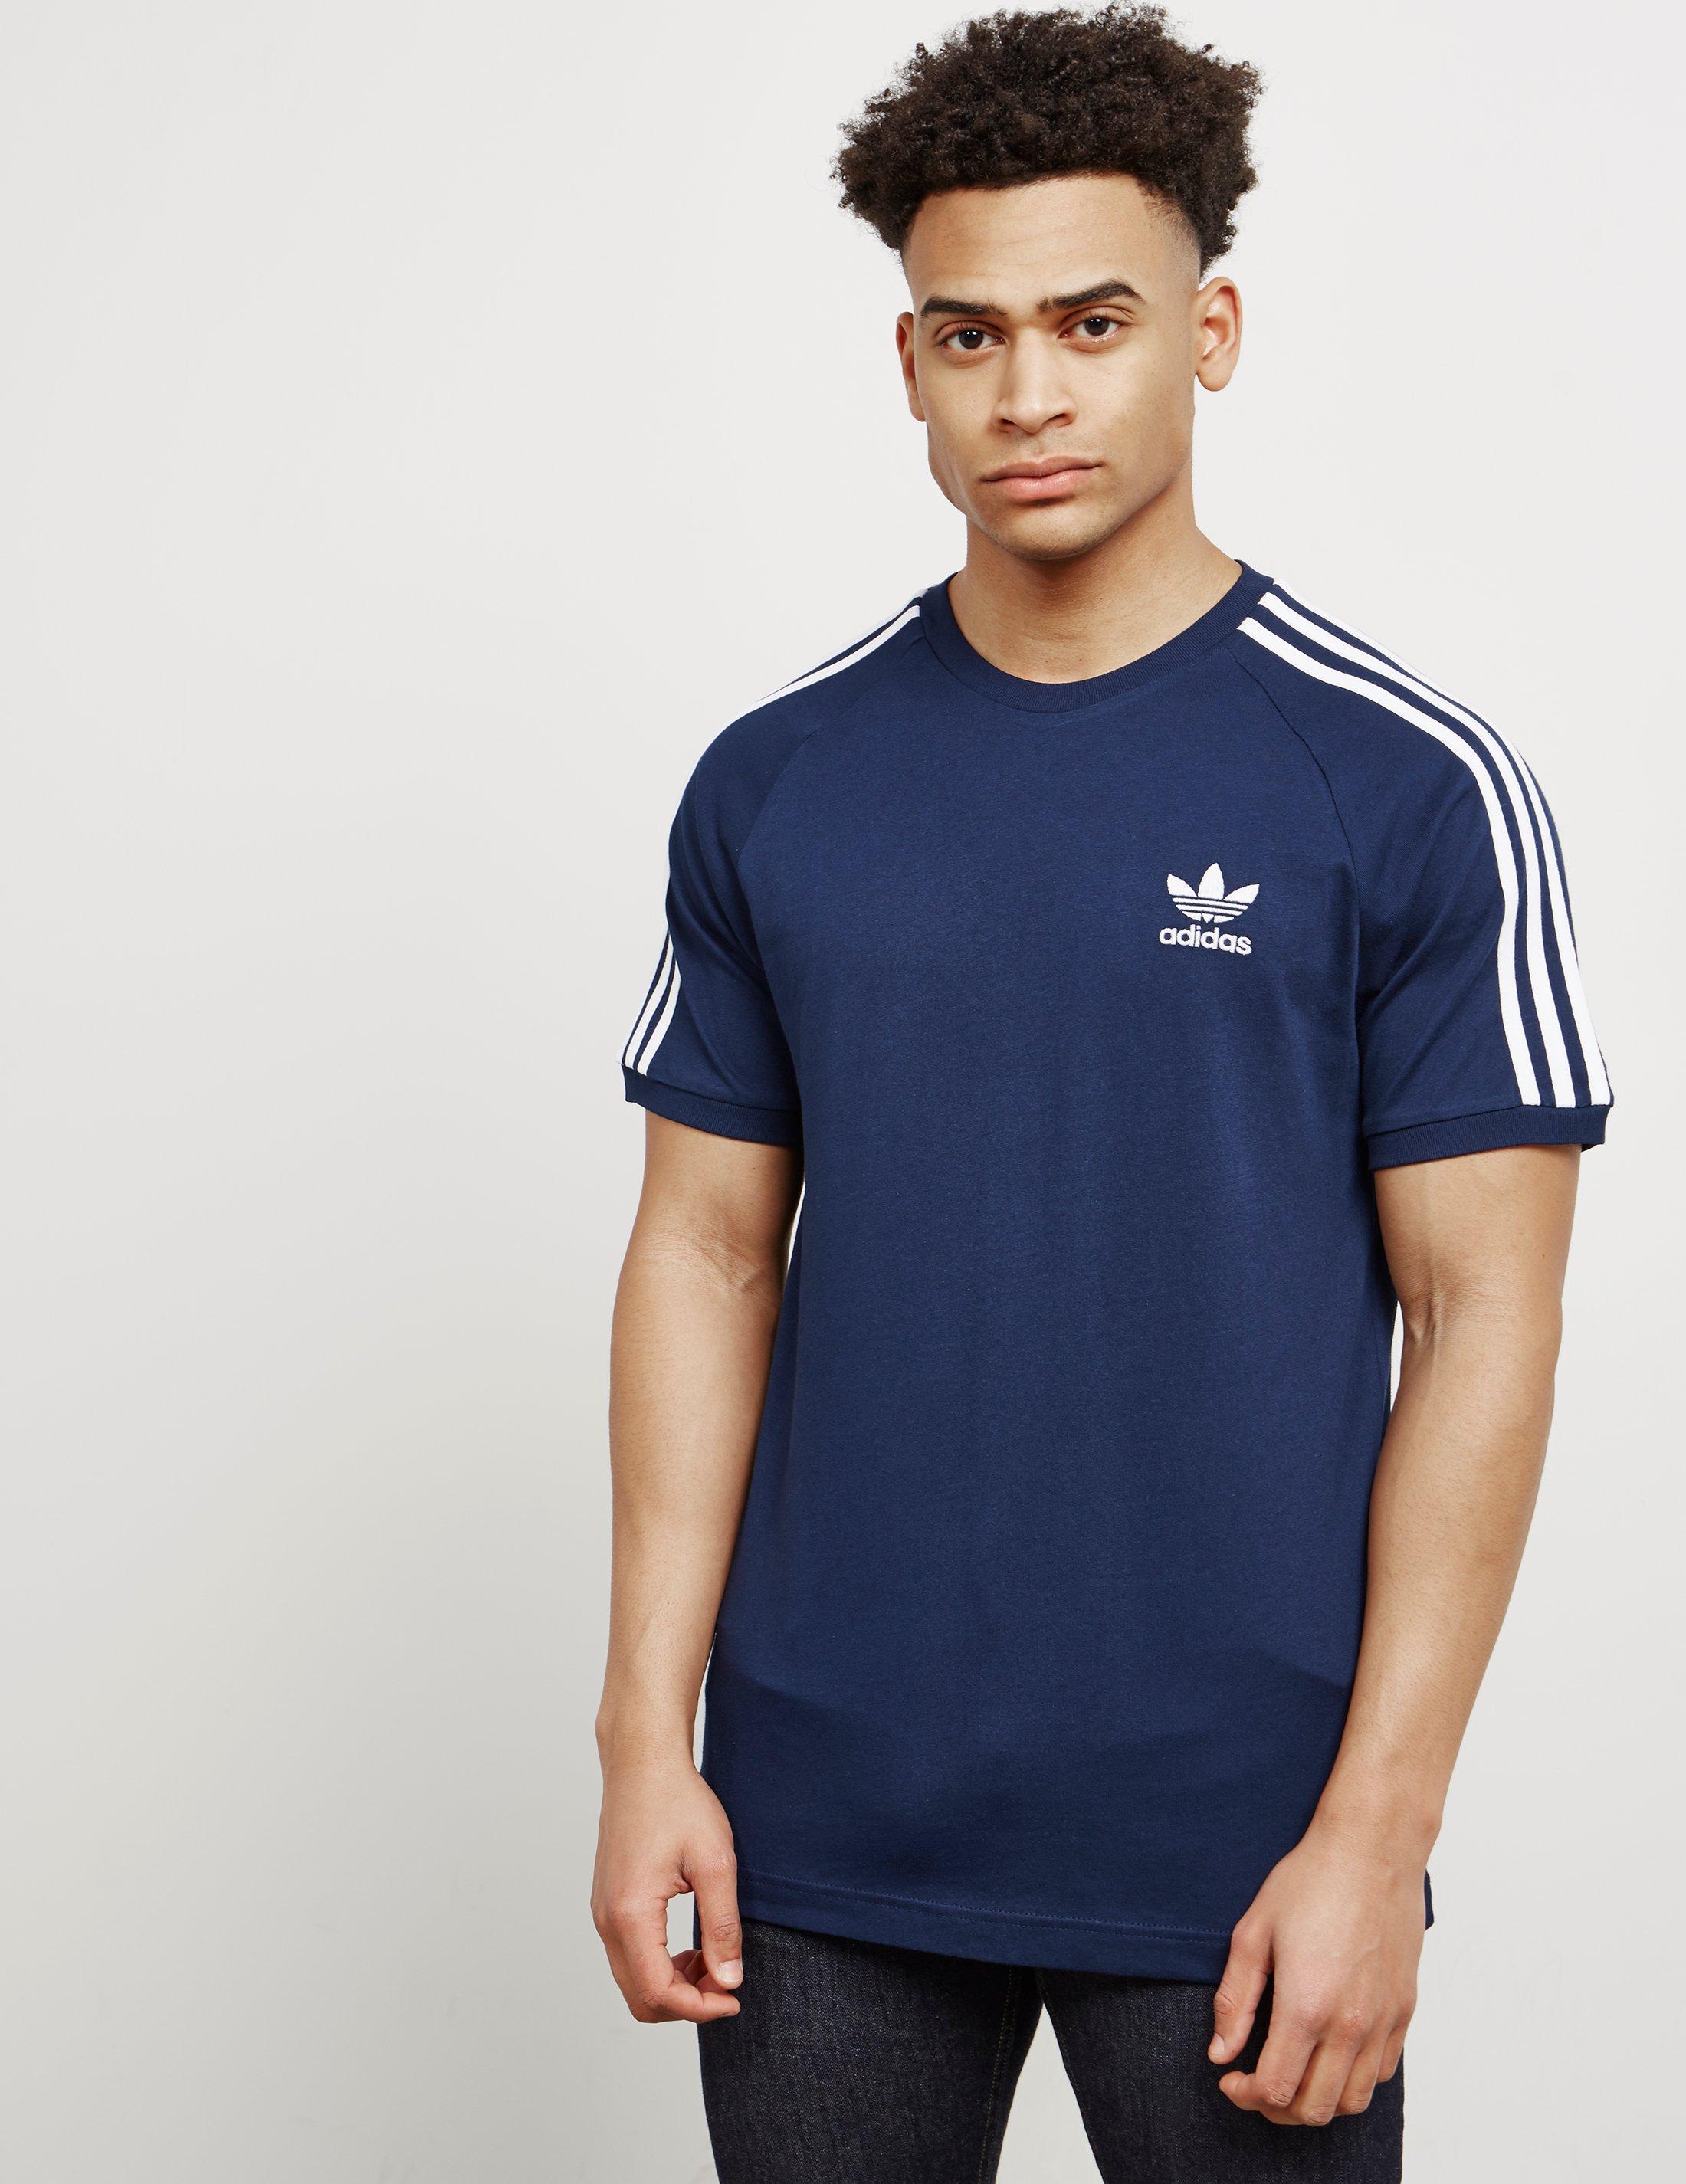 Buy > white and navy blue adidas shirt > in stock